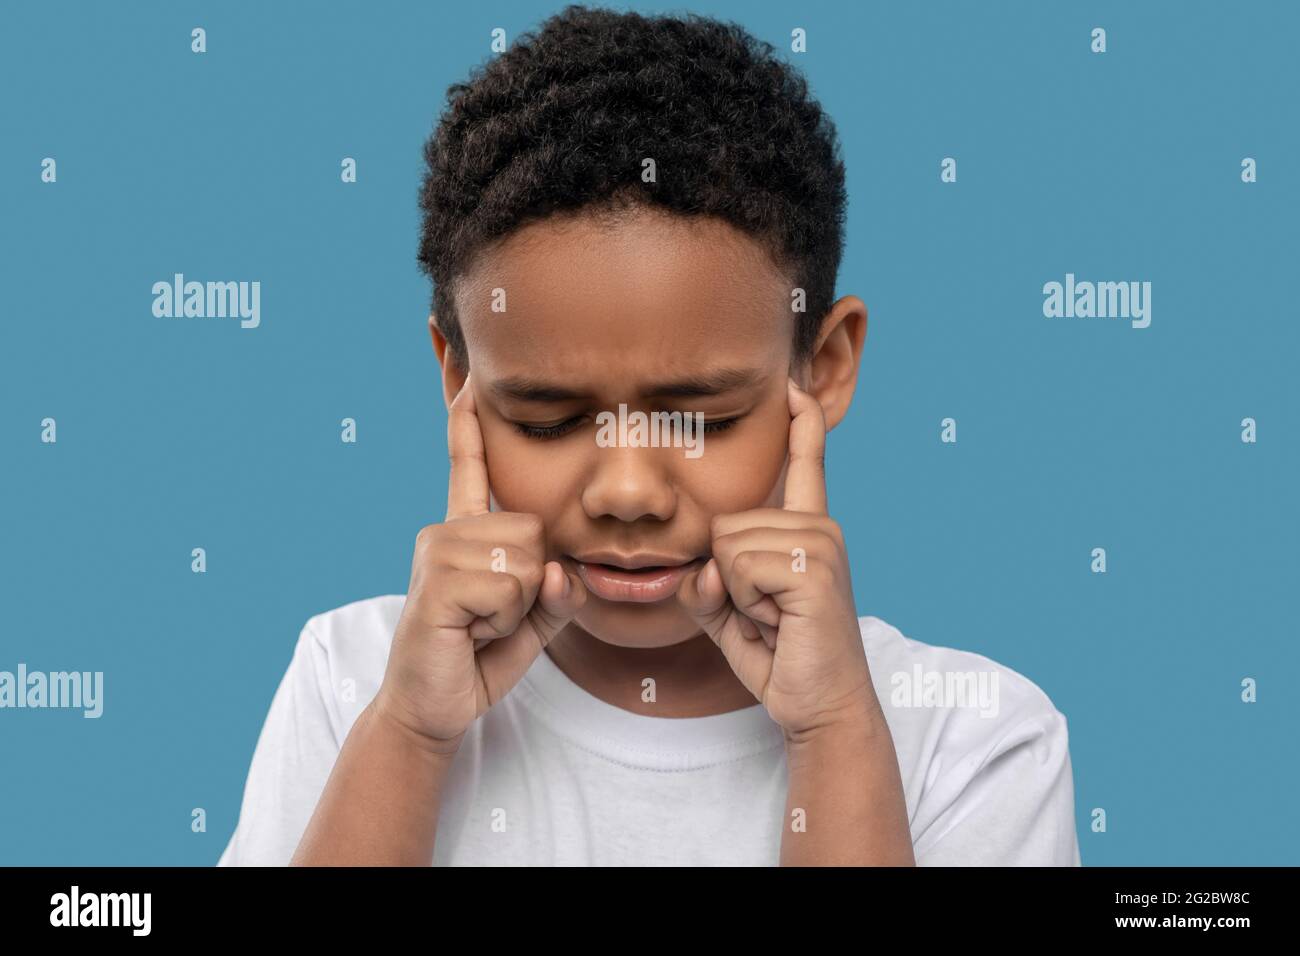 Darkskinned boy with closed eyes and unhappy grimace Stock Photo